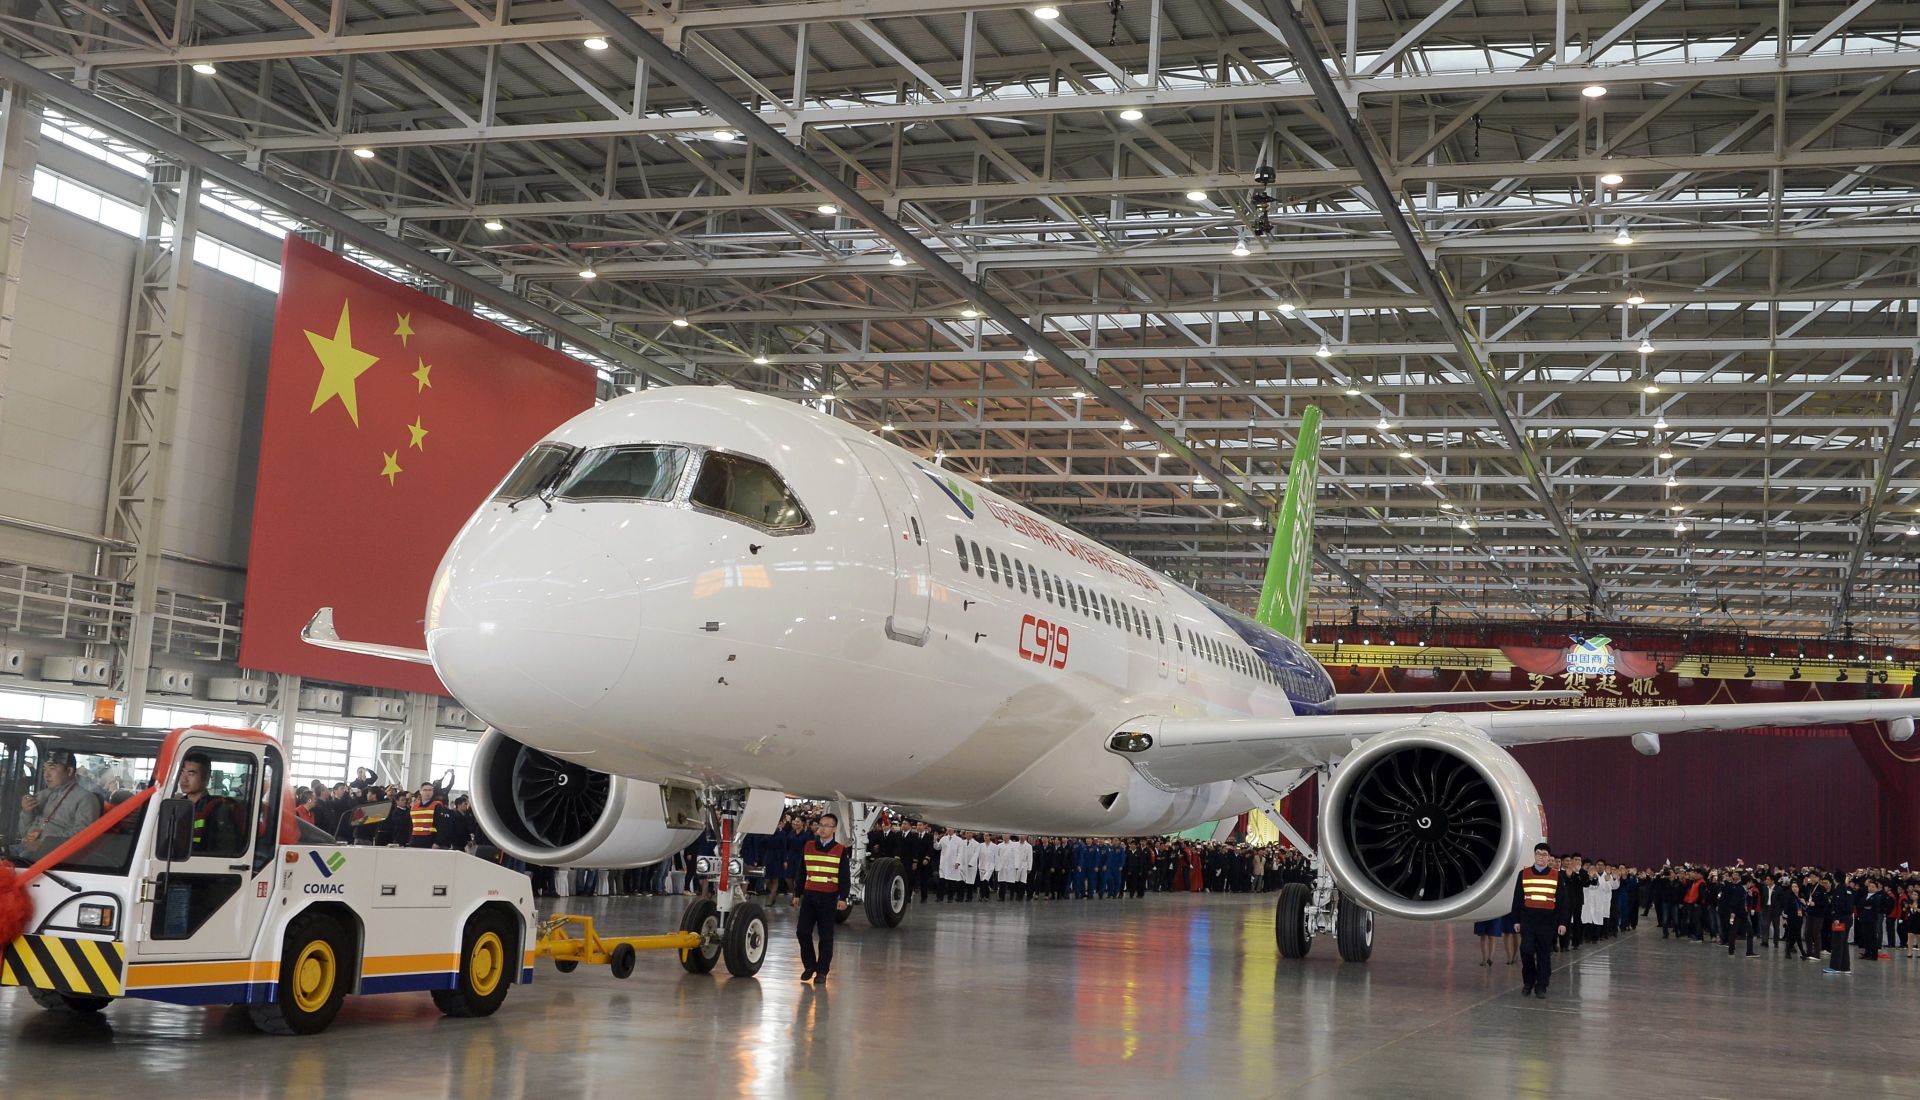 epa05007035 Workers roll out the first C919 passenger jet plane at the state-owned Commercial Aircraft Corporation of China Ltd (COMAC) in Shanghai, China 02 November 2015. China has spent seven years and huge amount to develop the 158-seat jet to boost its aviation industry, posing a challenge to Airbus and Boeing.  EPA/STRINGER CHINA OUT